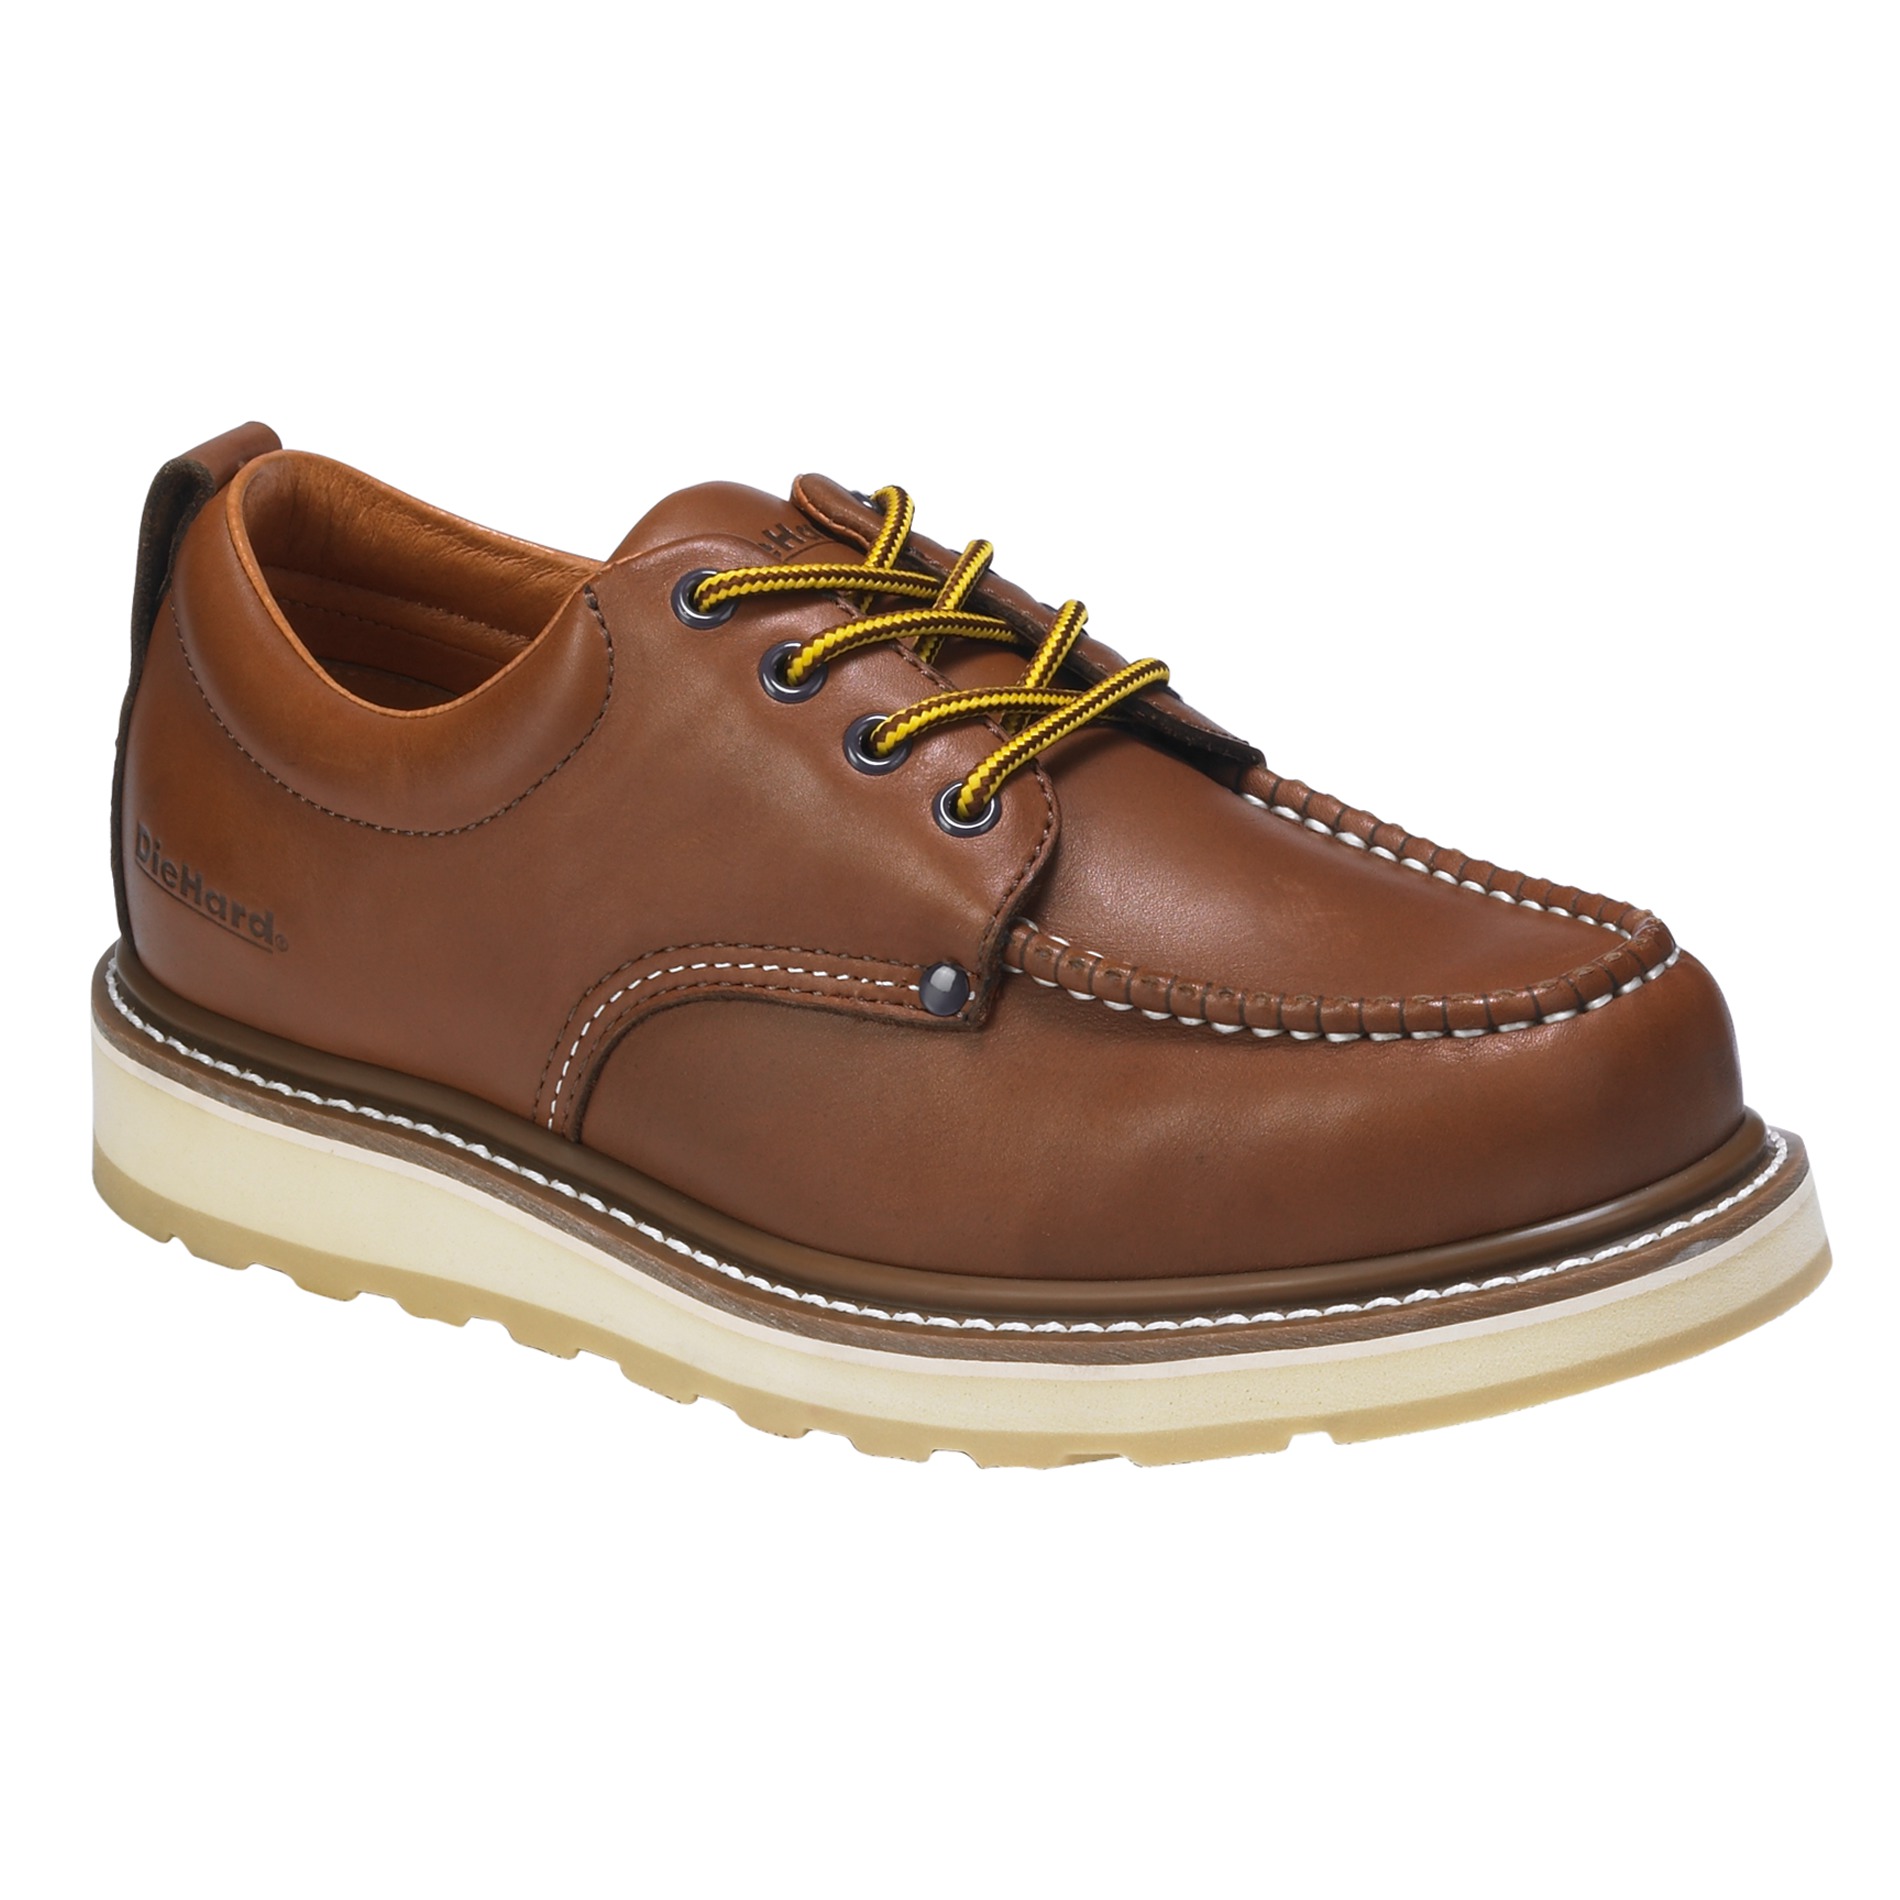 work shoes for men diehard menu0027s soft toe leather oxford work shoe - brown IQPITCP